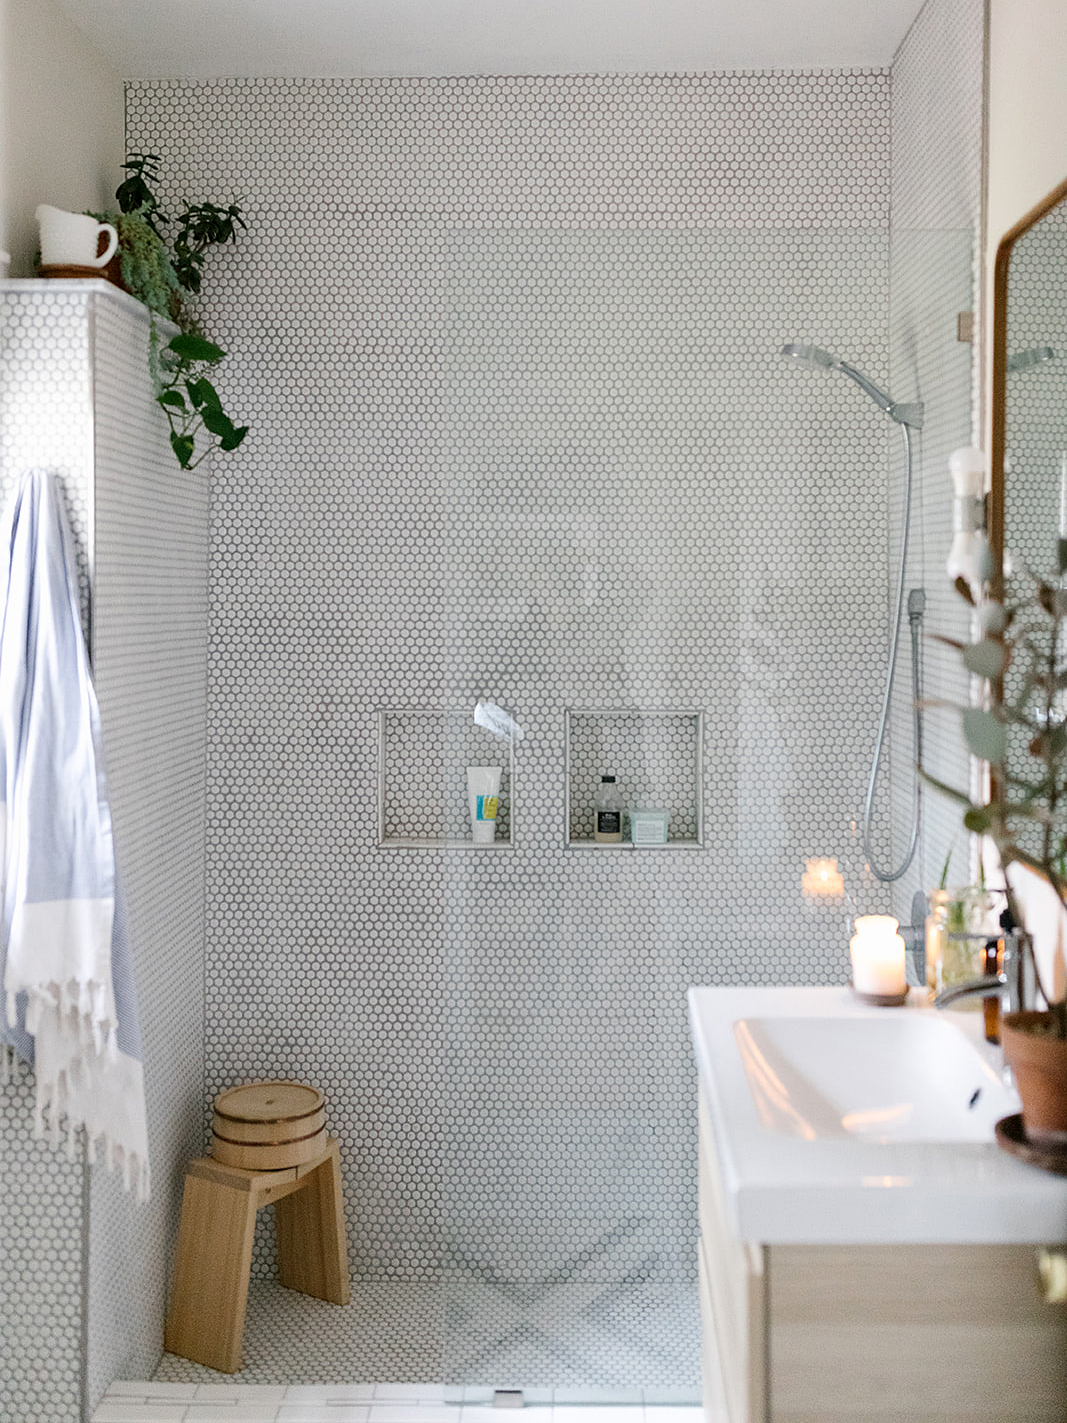 Shrinking the Vanity and Ditching the Tub Made This Bleak Bathroom Feel Brighter and Bigger